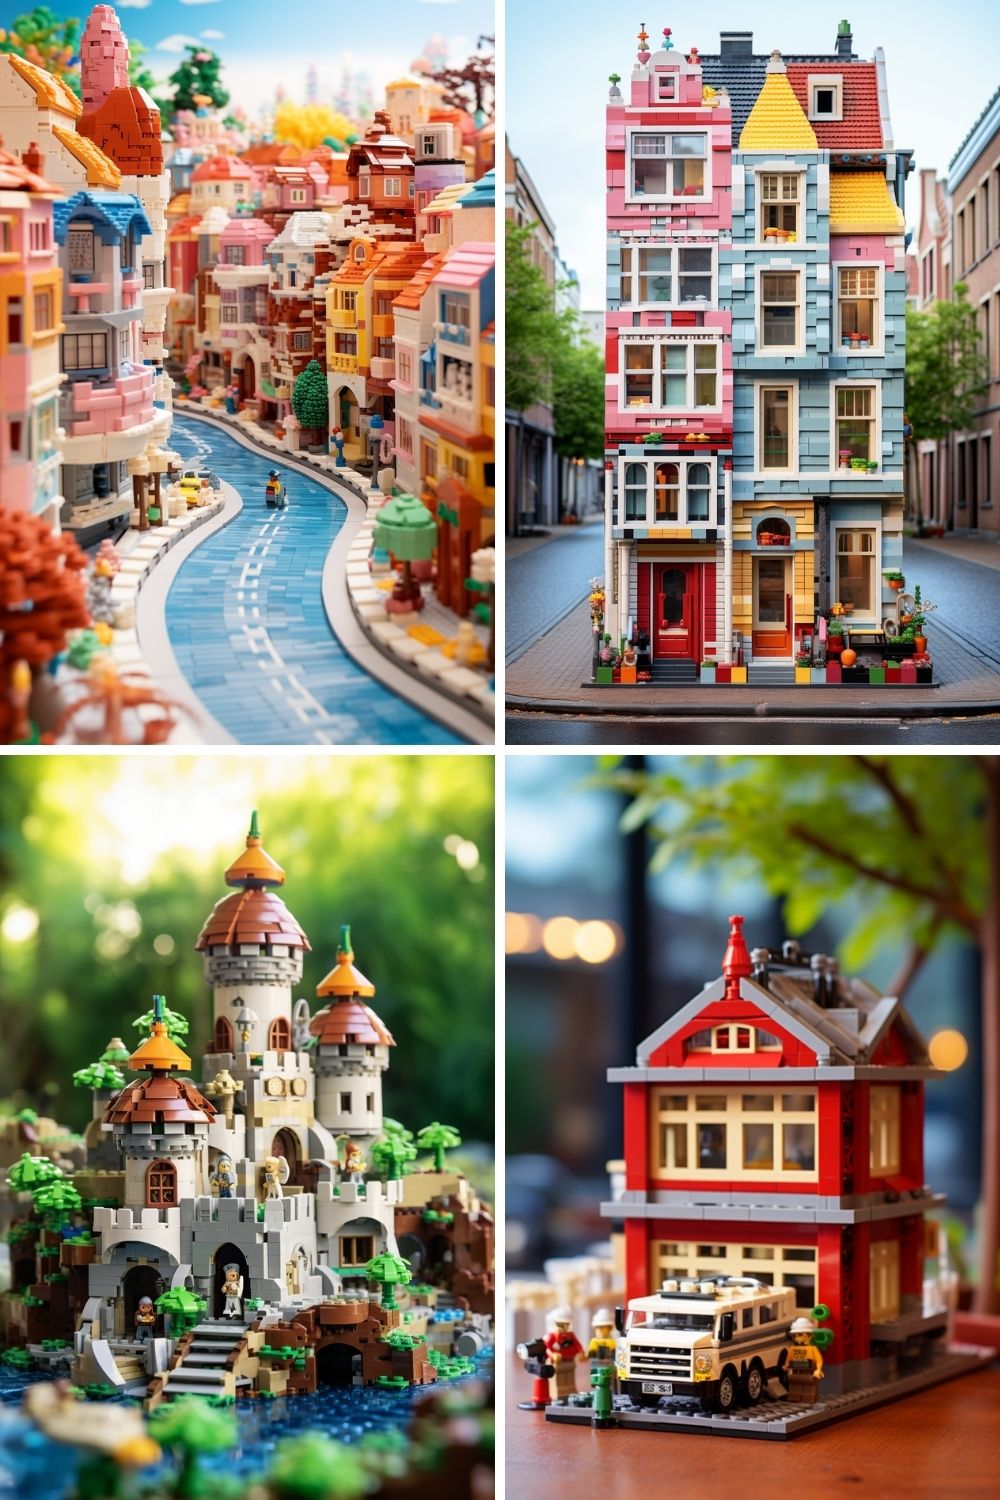 LEGO SET - Best Creative Unique Midjourney Prompt Ideas To Spark Your Creativity - Sprinkle of AI Image Prompt Set 6